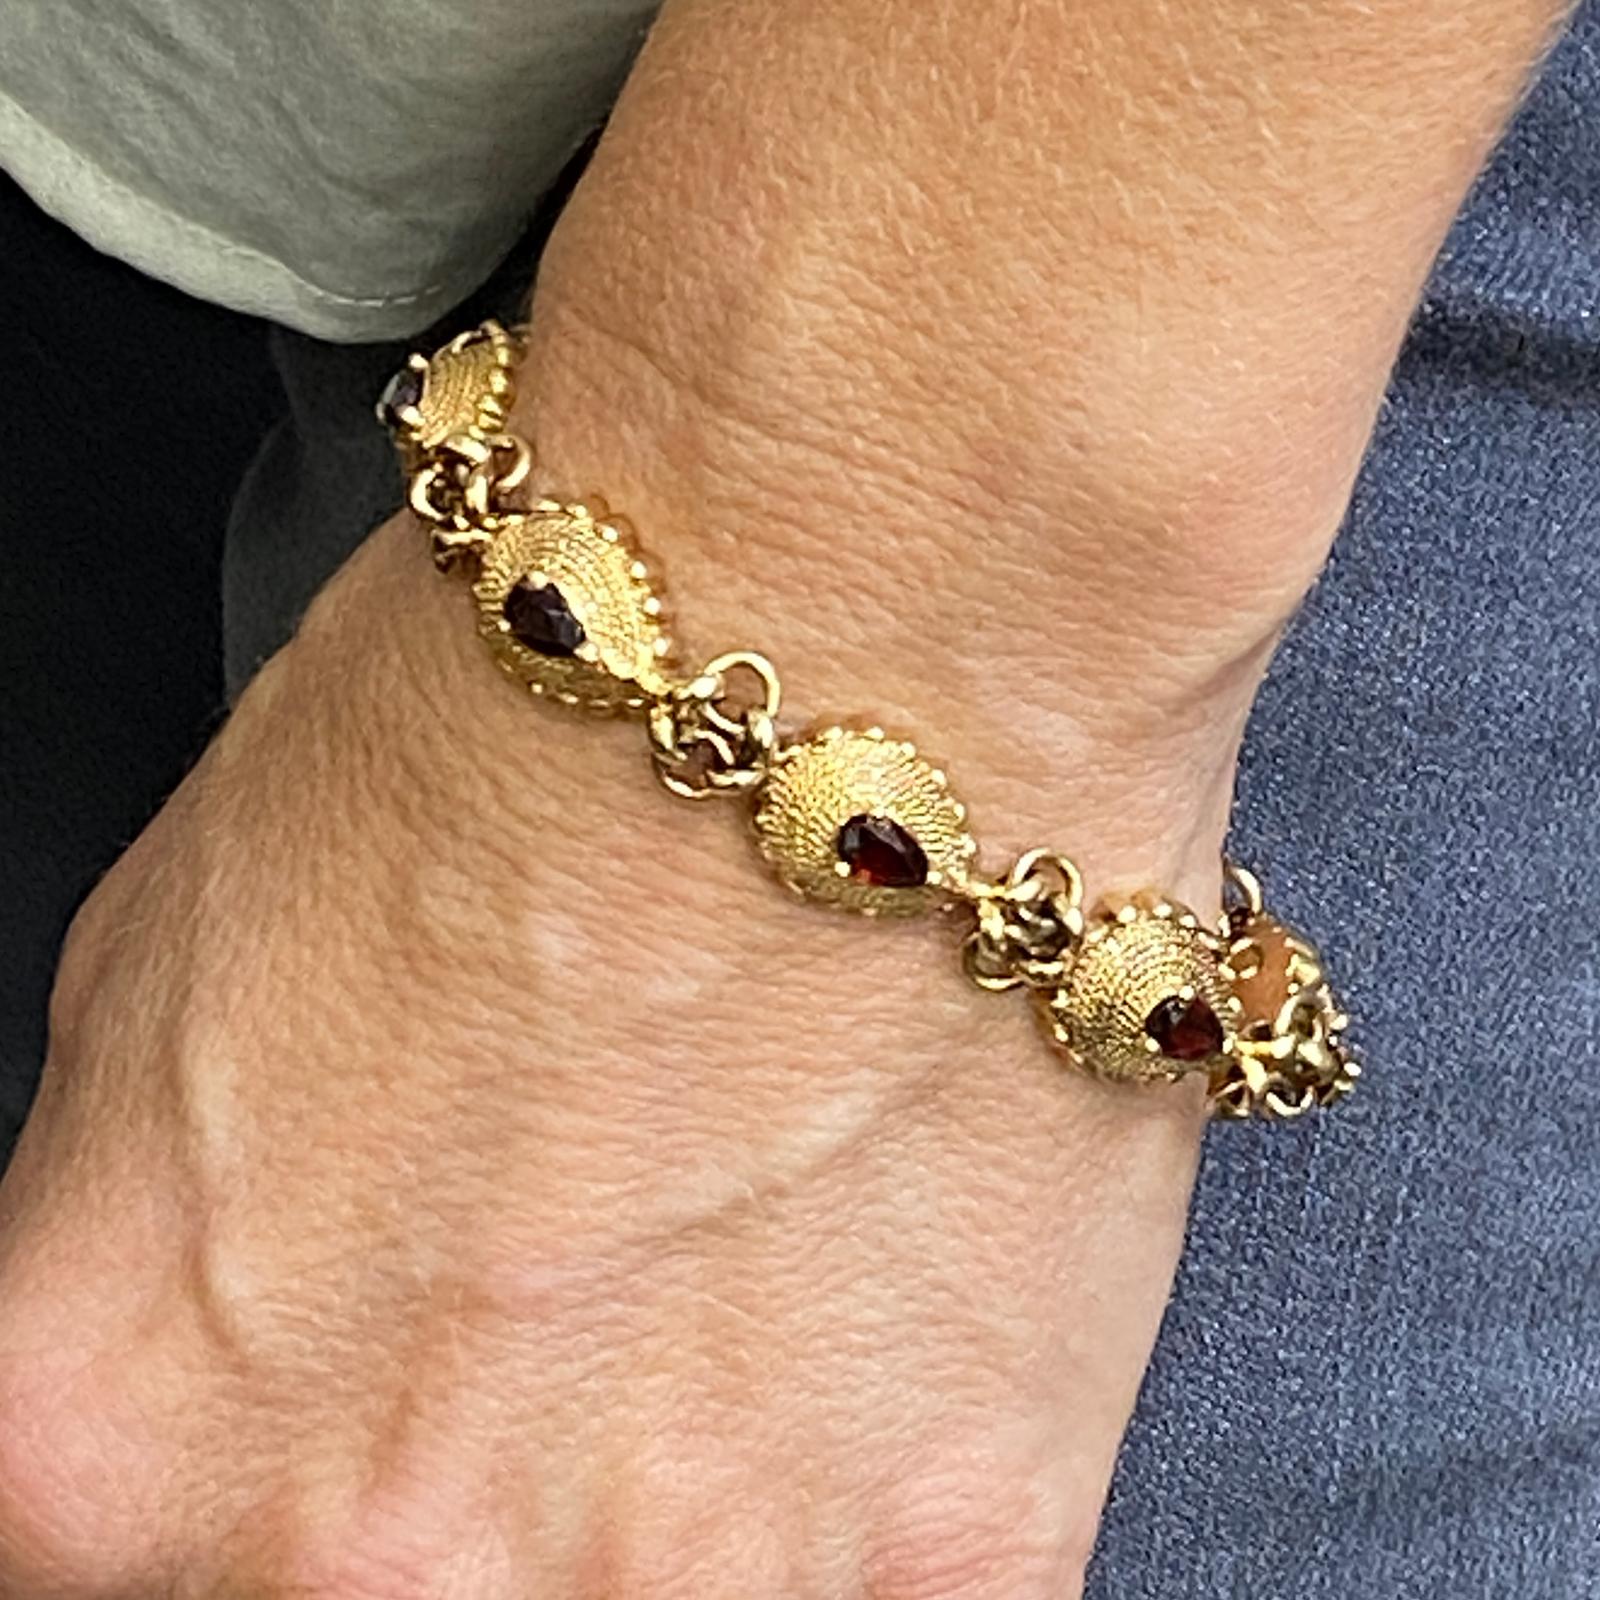 1960's Garnet link bracelet bracelet fashioned in 14 karat yellow gold. The bracelet features 8 pear shape garnet gemstones weighing approximately 3.00 carat total weight.  The bracelet measures 7.25 inches in length. 